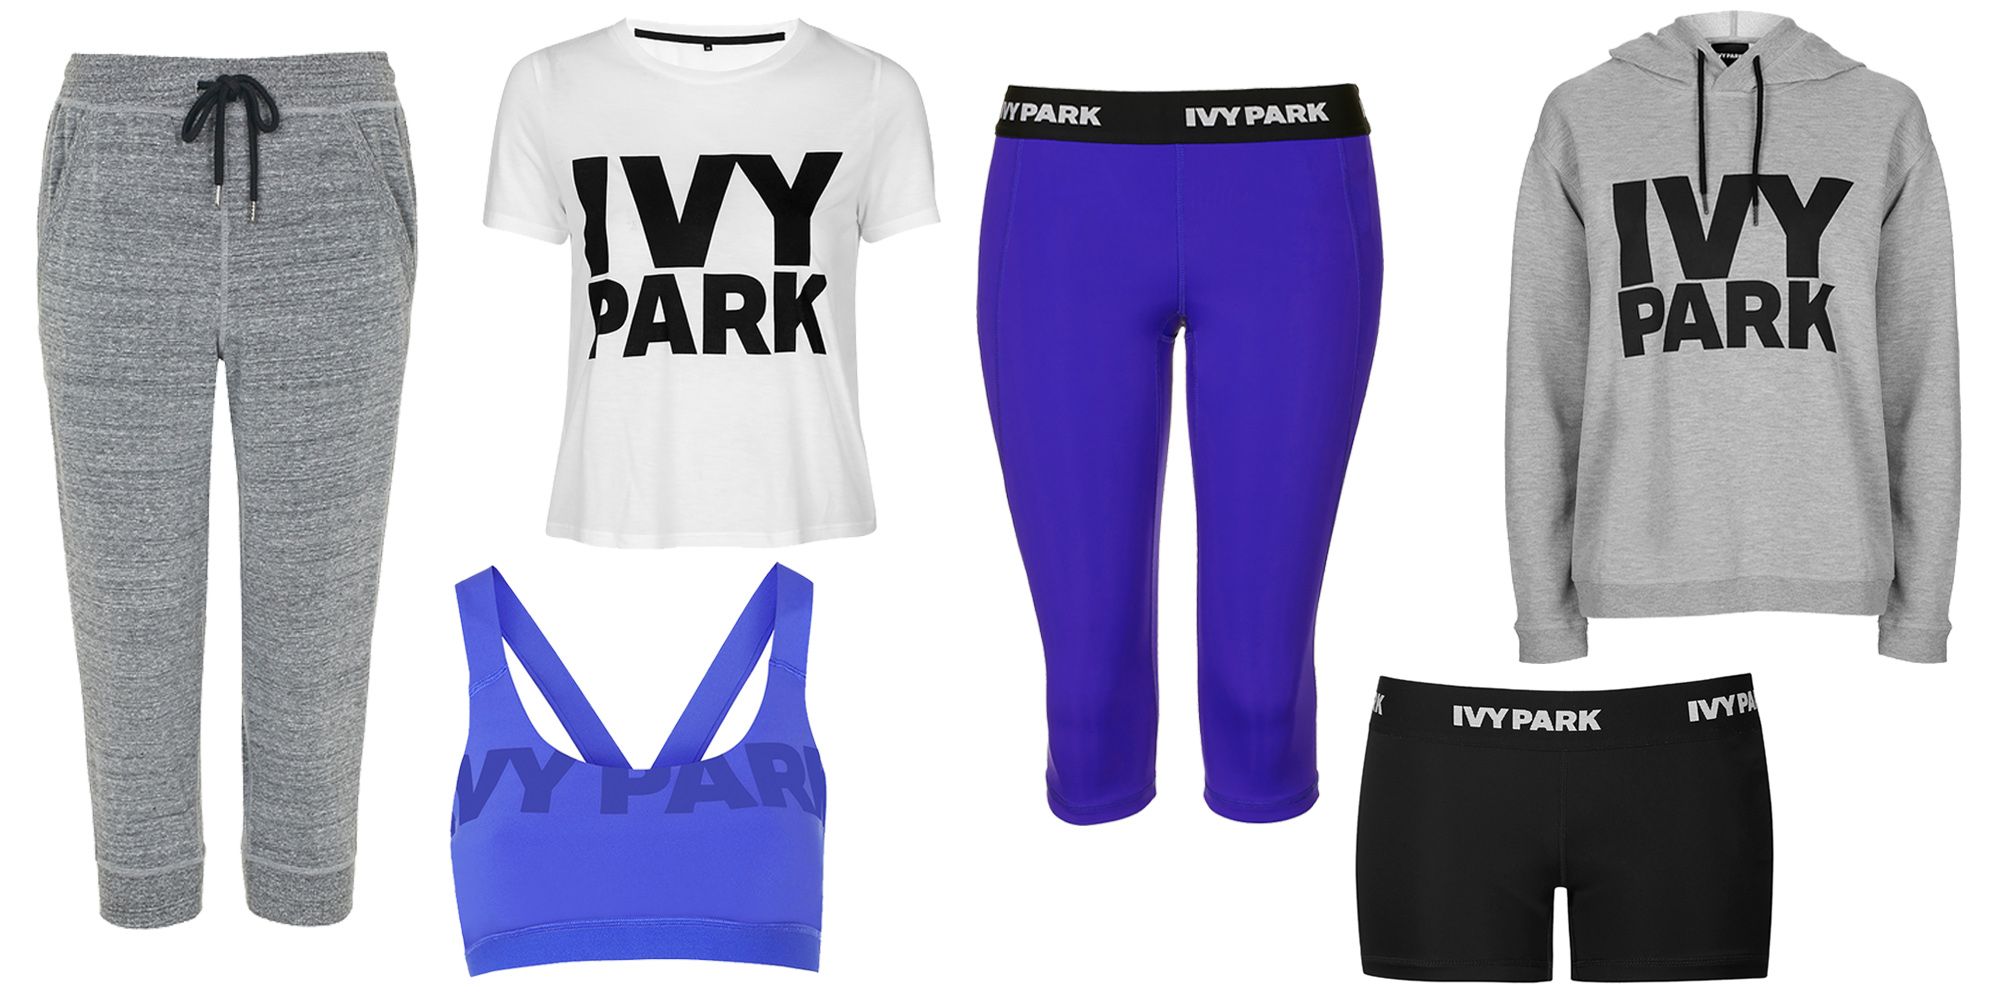 ivy park cost